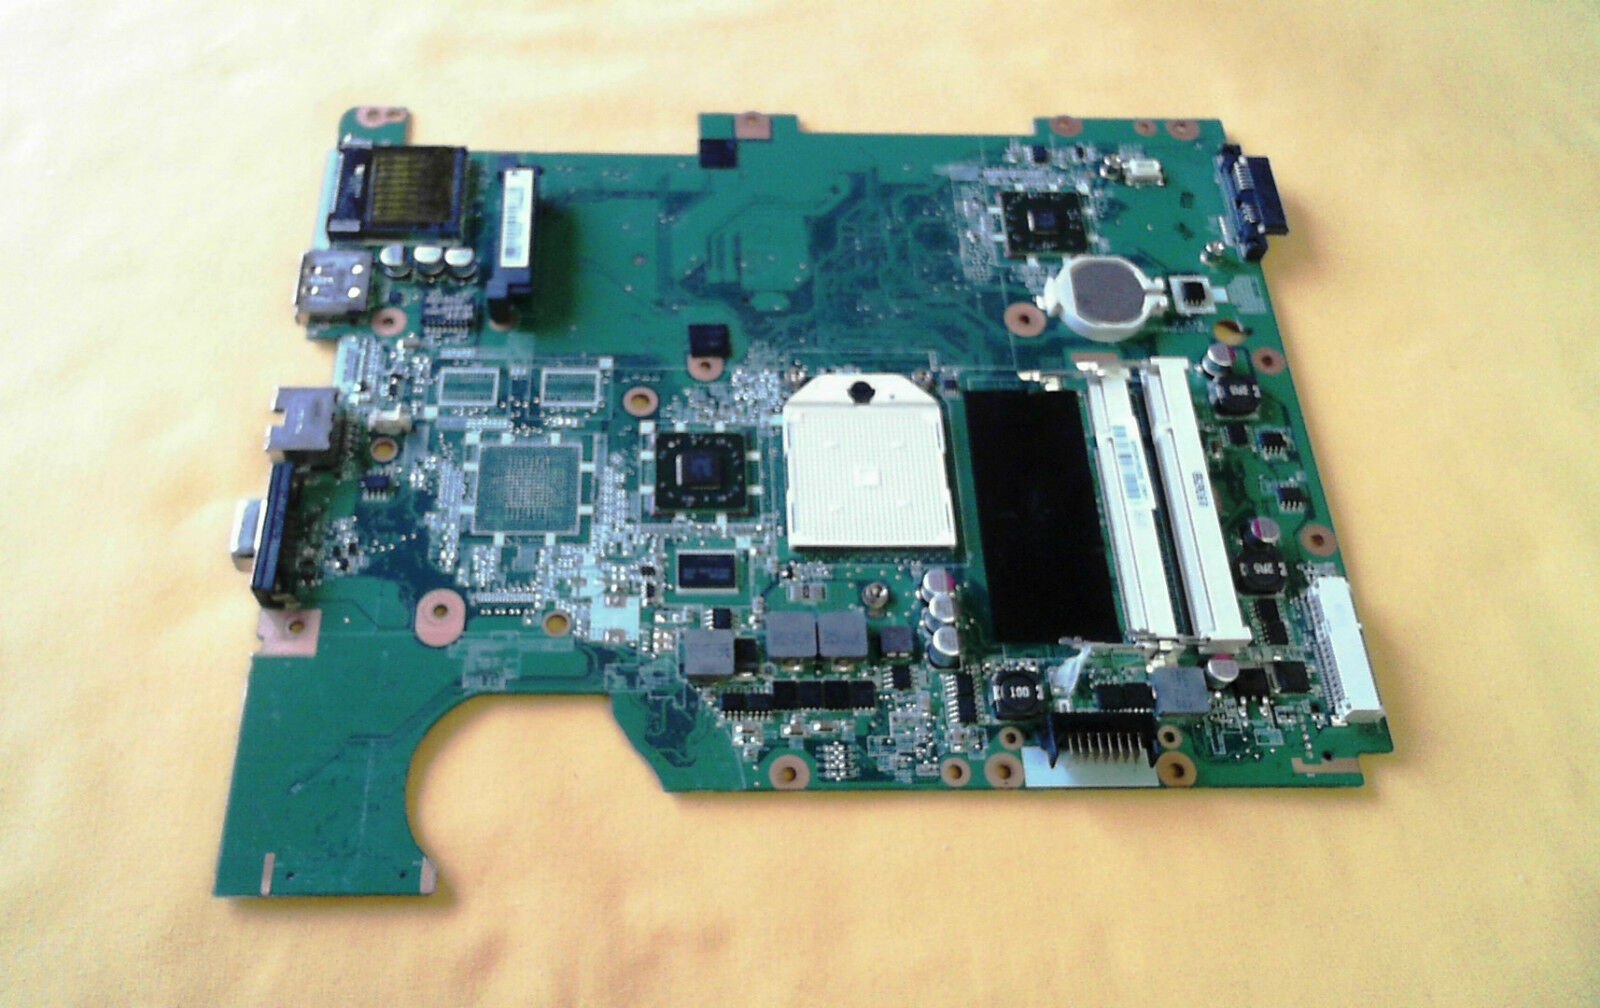 Genuine HP G61 577064-001 Compaq CQ61 Motherboard New BIOS Version. Tested Tracking Number is INCLUDED, and